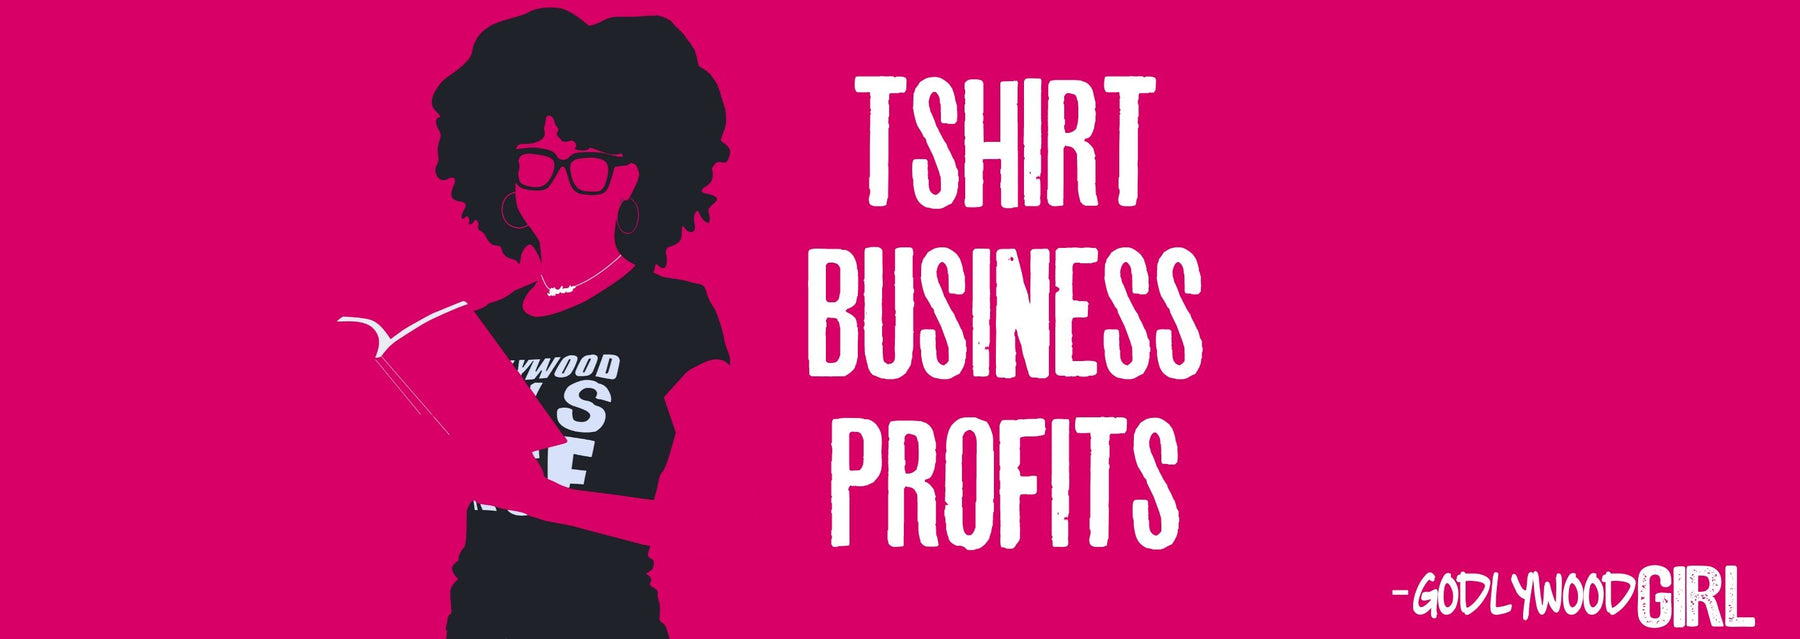 TSHIRT BUSINESS PROFIT | How To Make A PROFIT In A TShirt Business Online (Christian Entrepreneur)